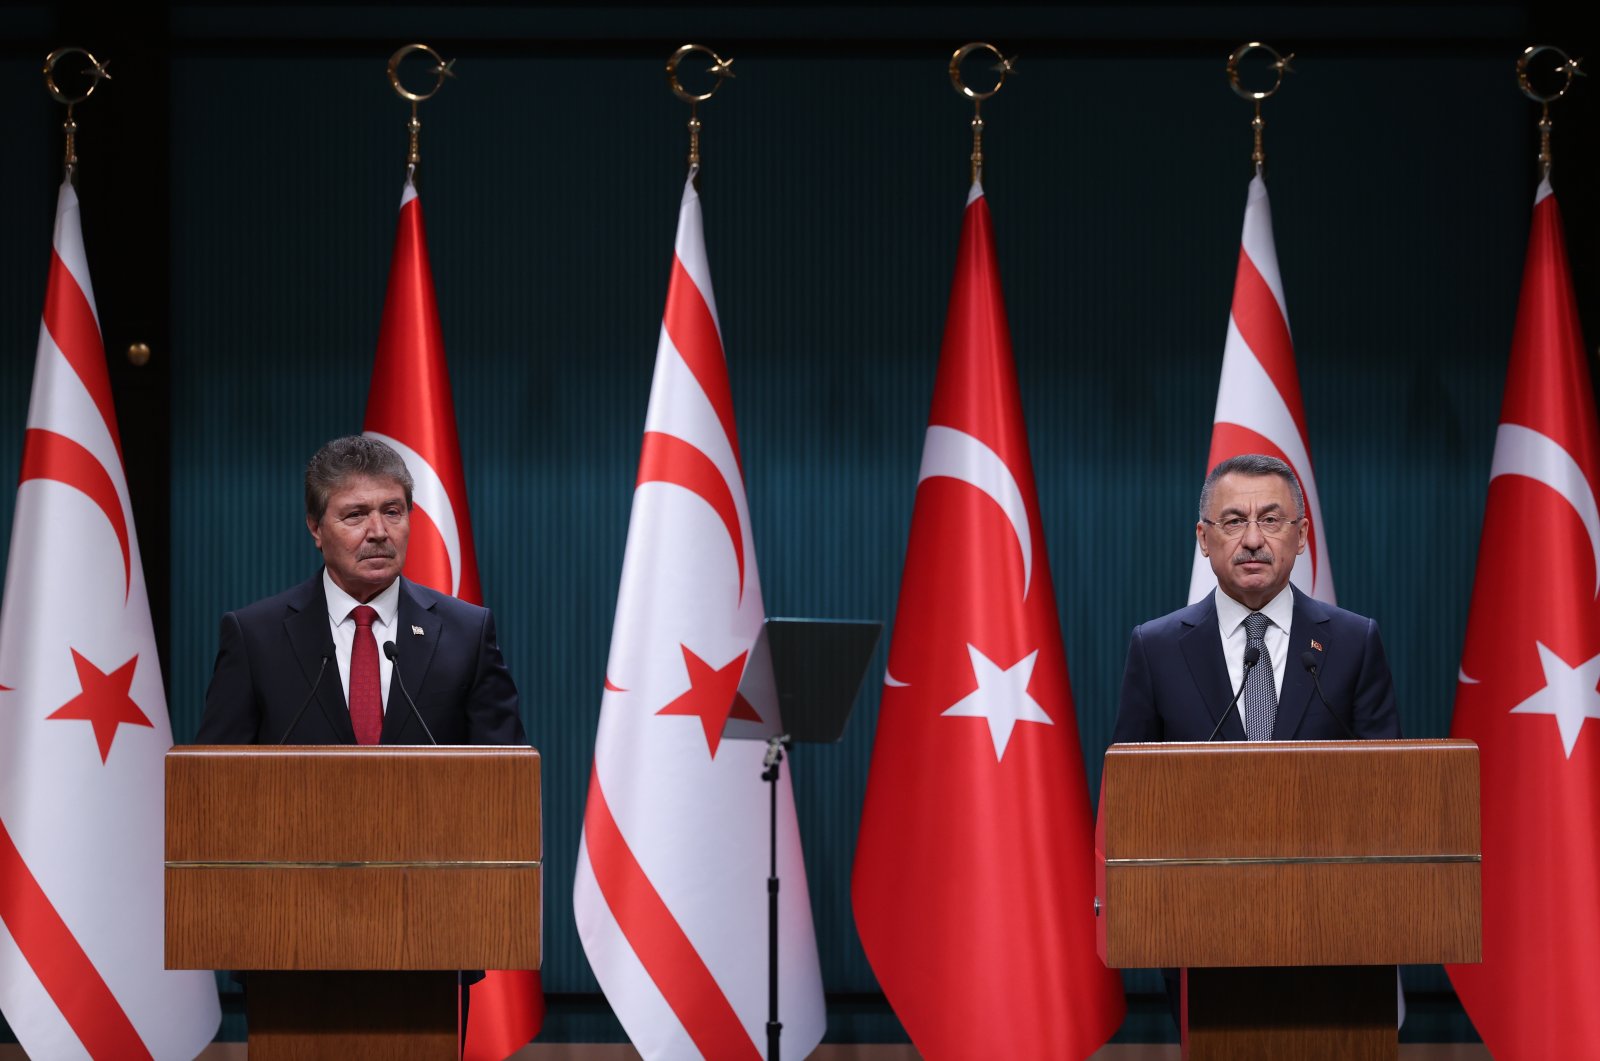 Vice President Fuat Oktay and TRNC Prime Minister Ünal Üstel attend joint news conference in Ankara, Jan. 17, 2023. (AA Photo)